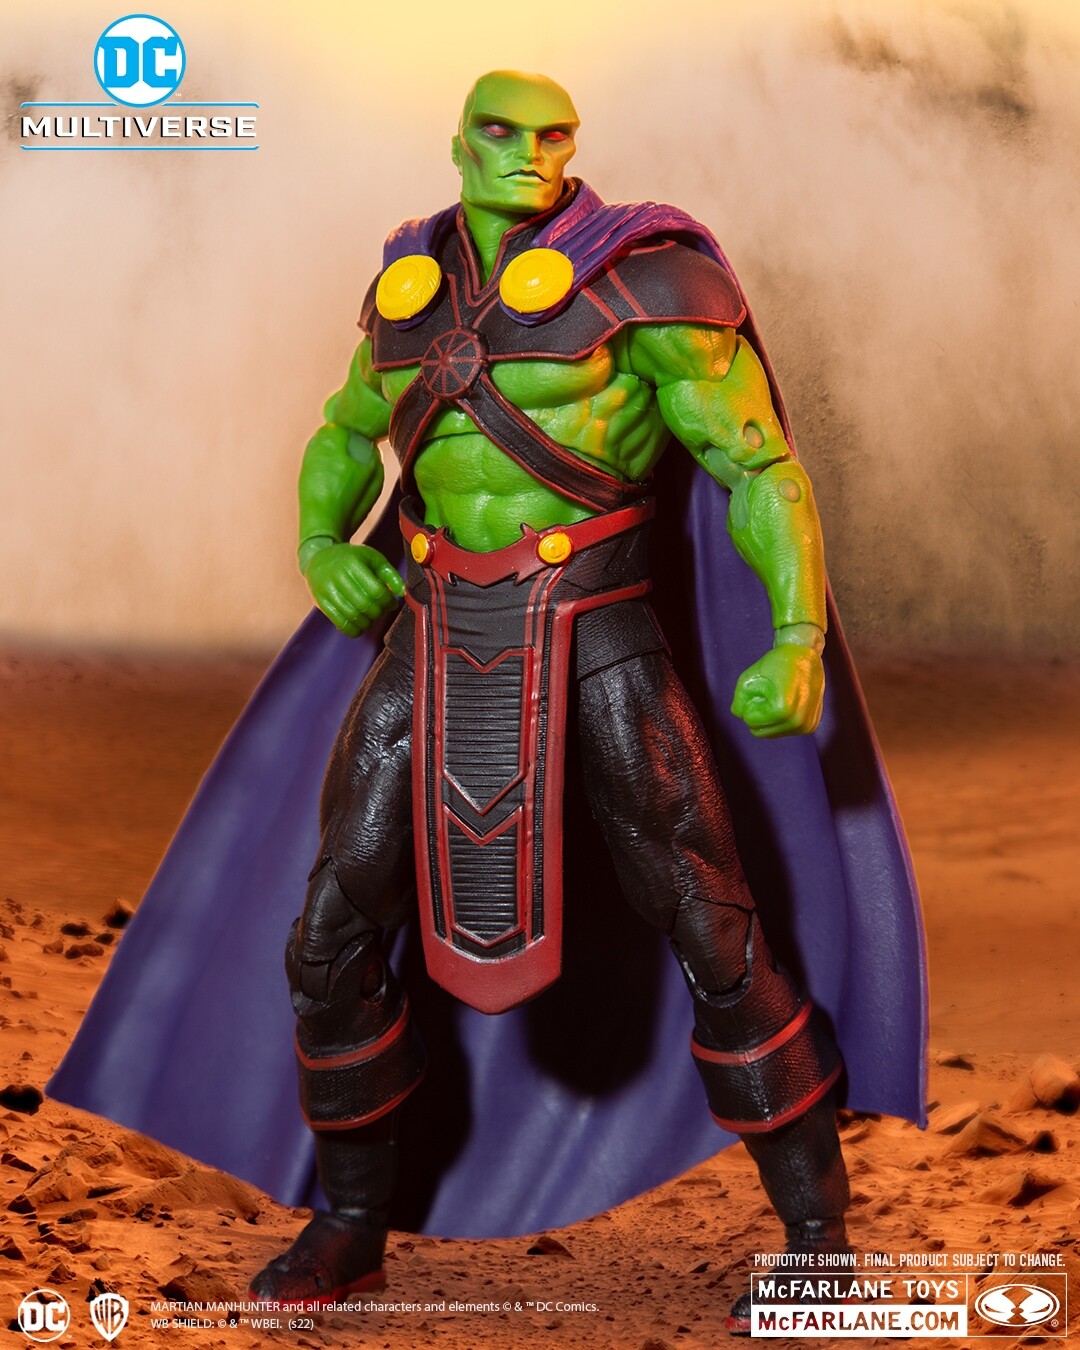 Martian Manhunter - I helped with articulation engineering